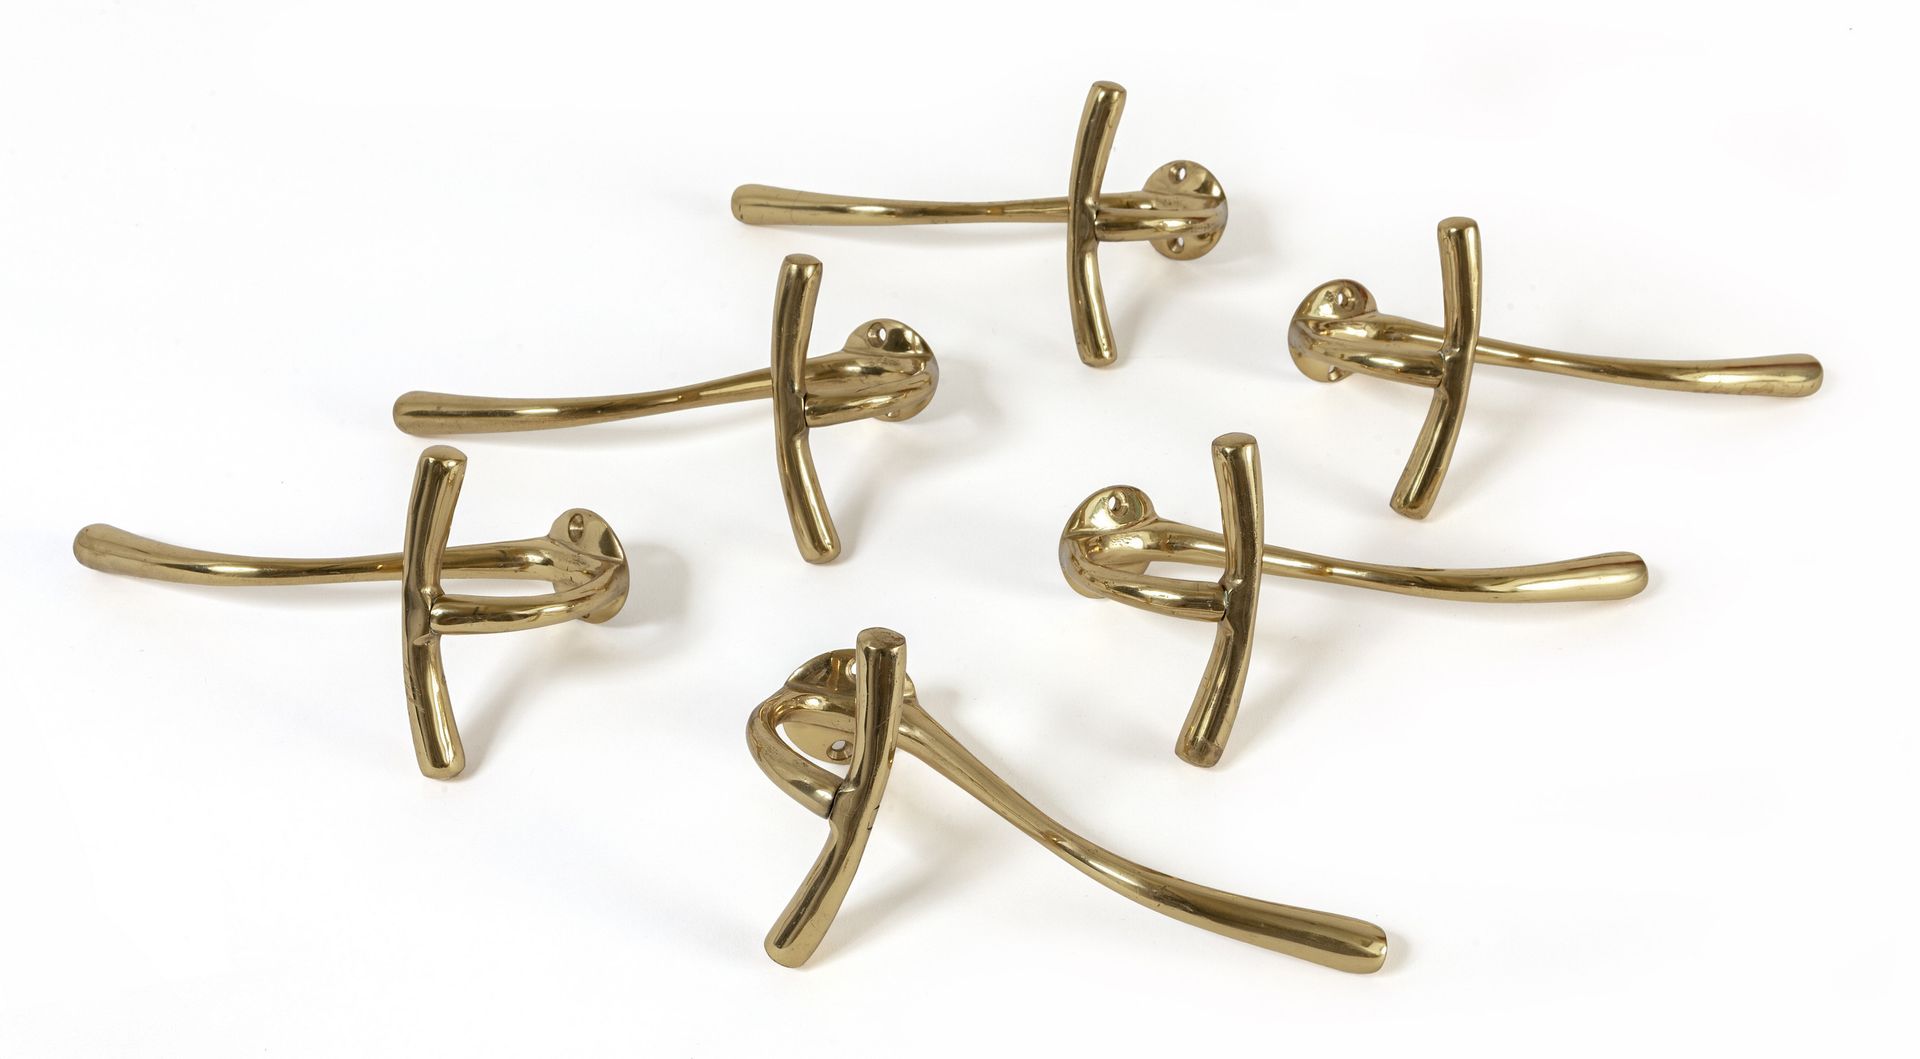 Azucena AZUCENA (Publisher)
Six hangers 'At 1' 1950s. 
Brass. 
Height 18 cm widt&hellip;